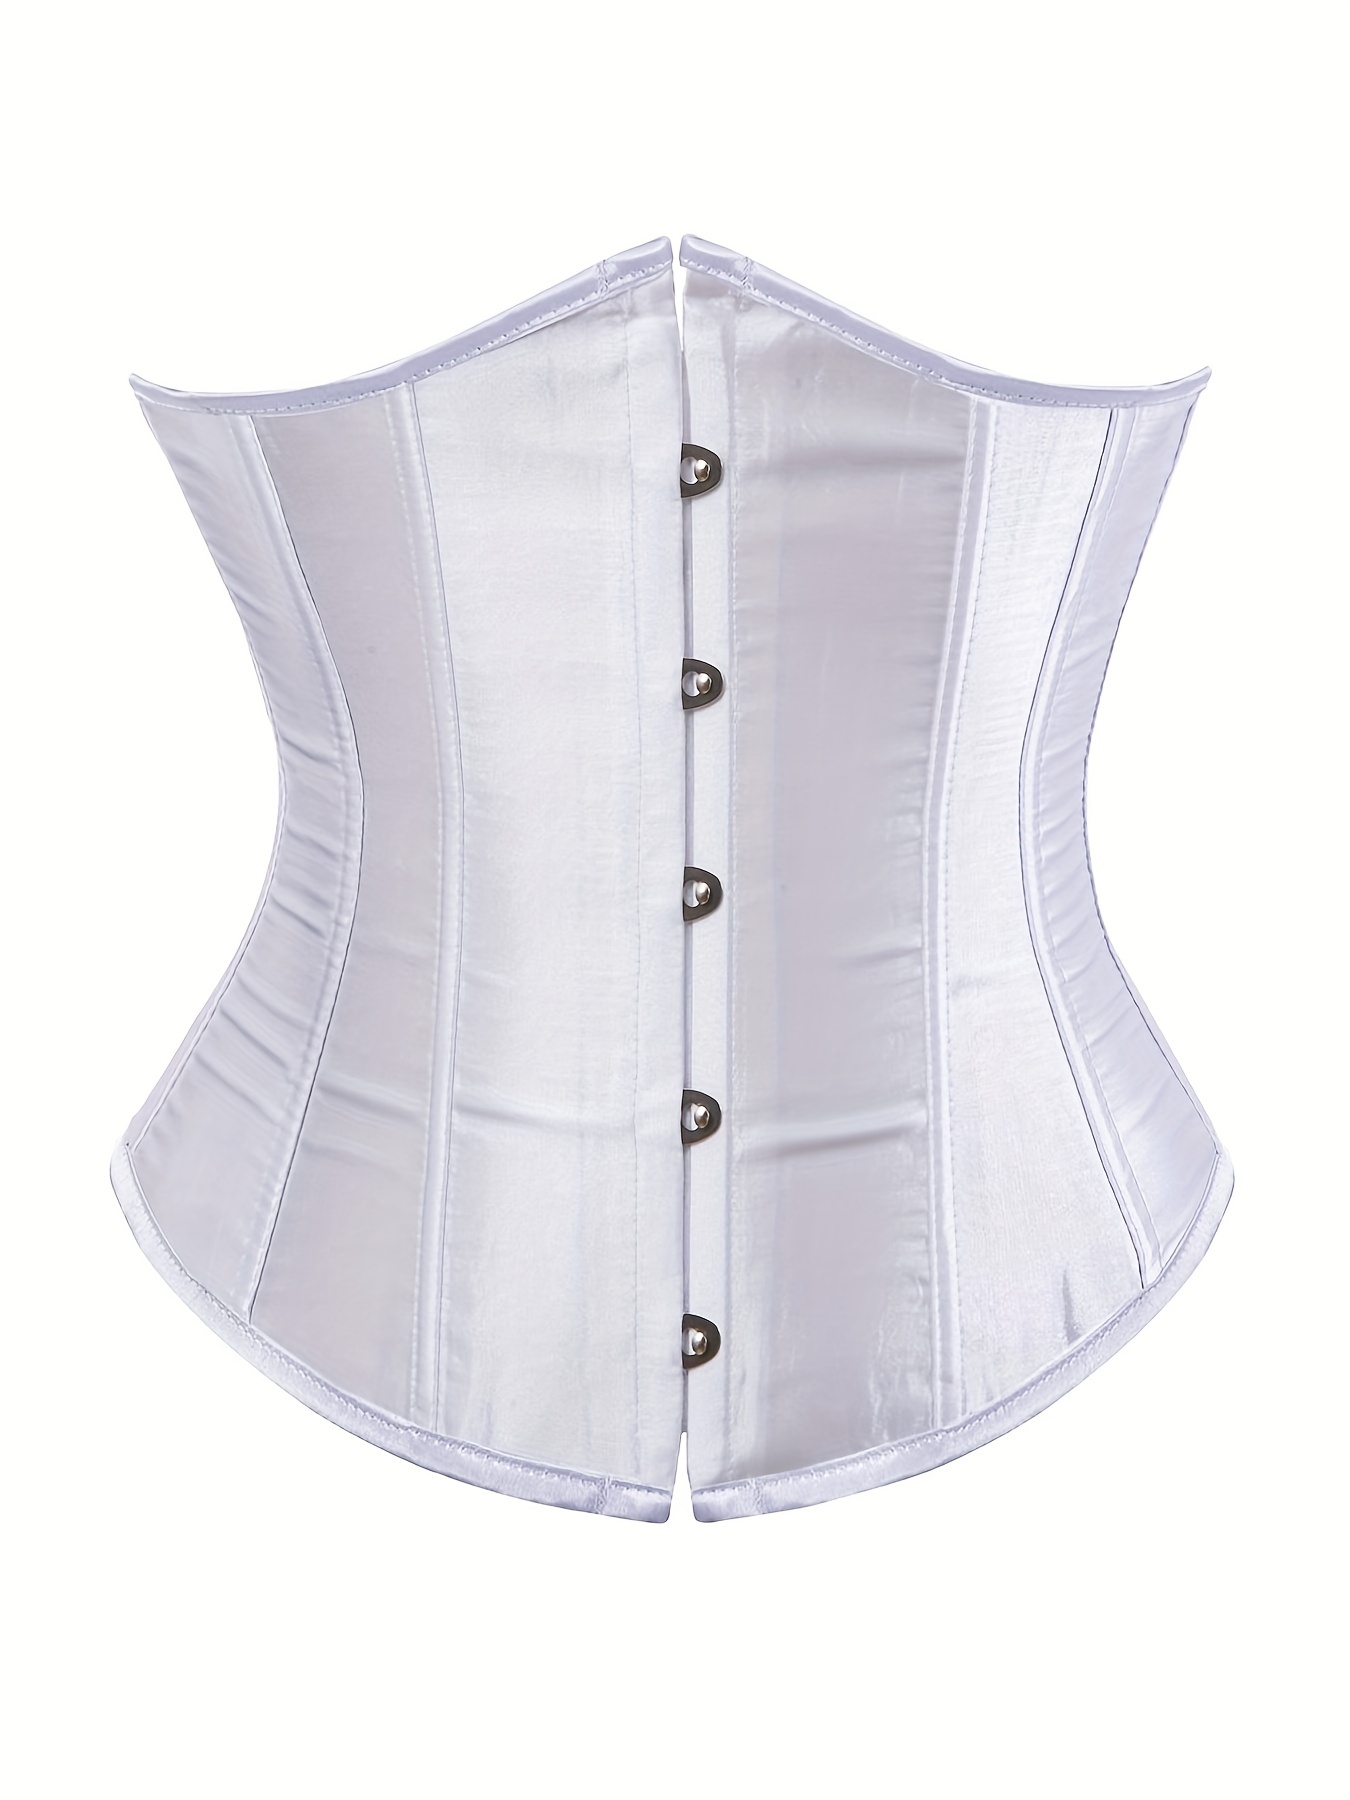 Up To 80% Off on Women Underbust Corset Shapew